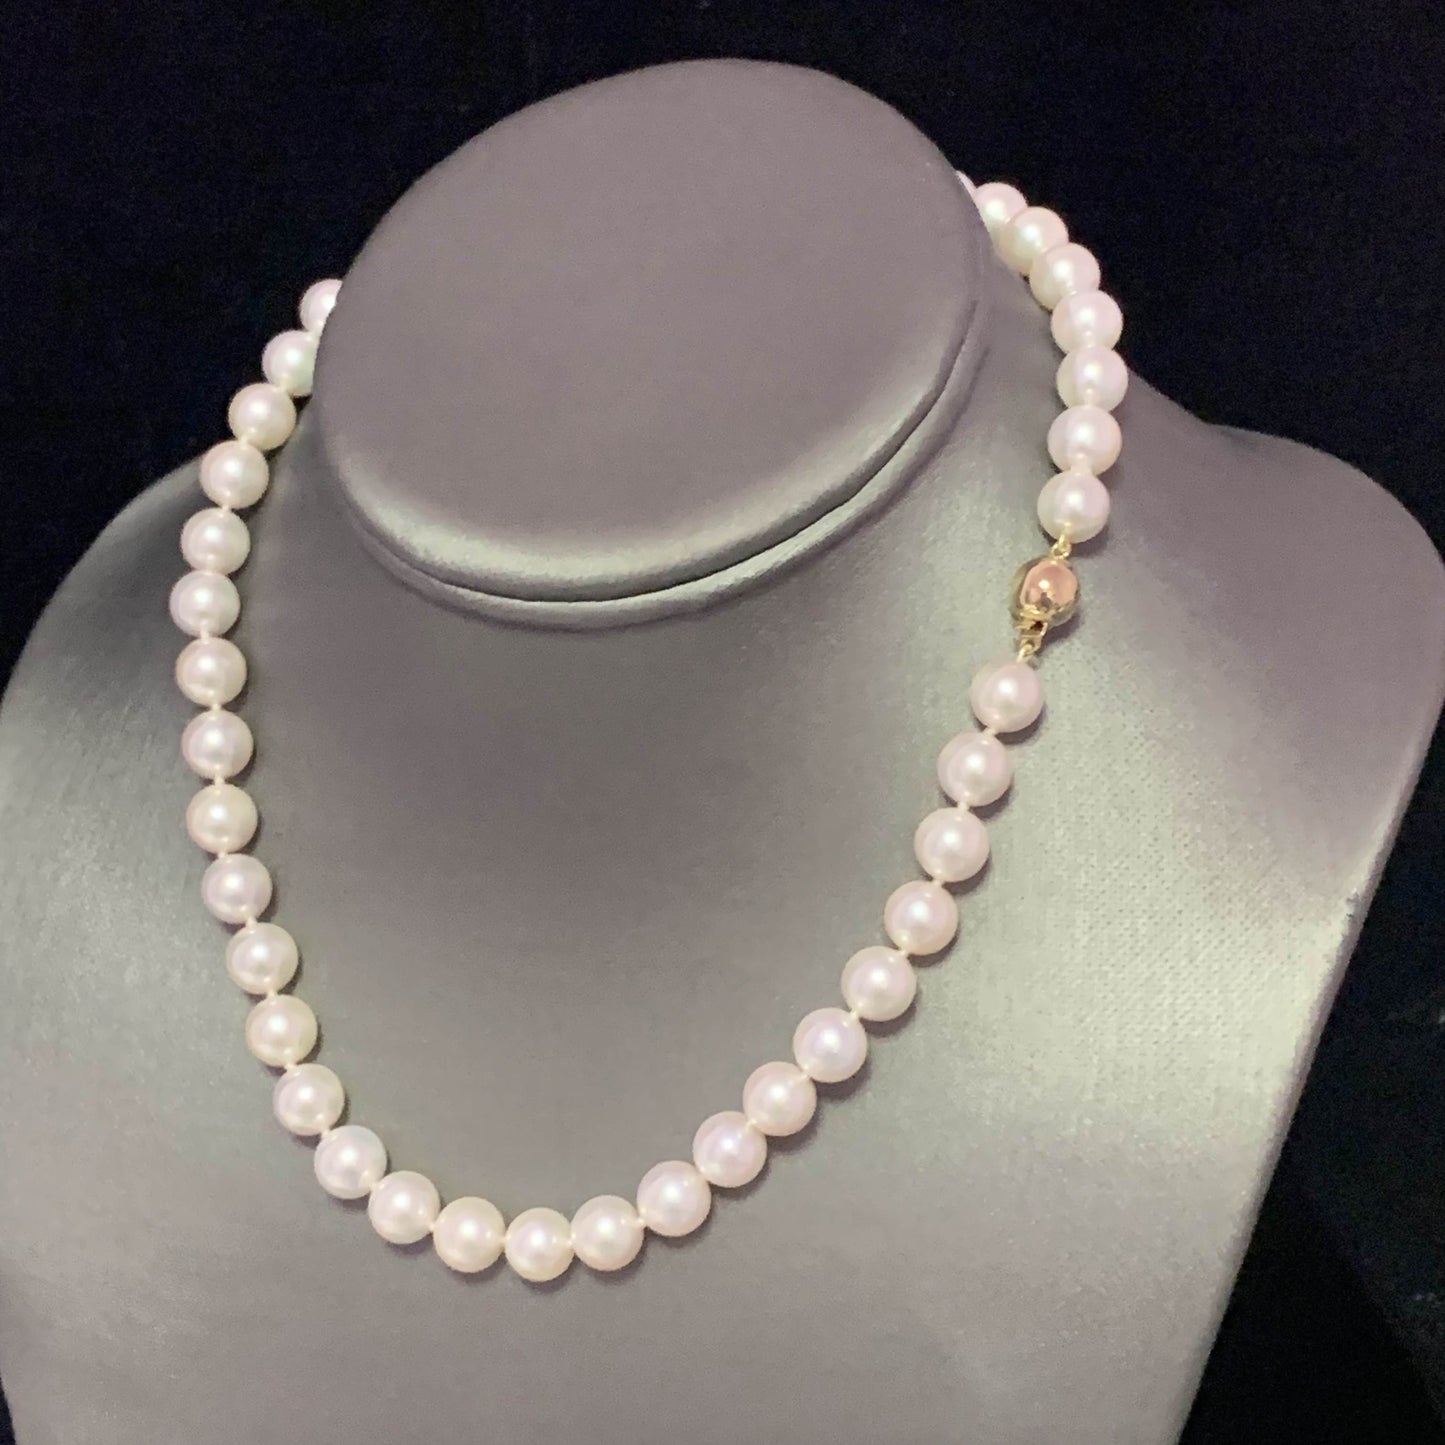 Akoya Pearl Necklace 14k Yellow Gold 8.5 mm 16" Certified $3,950 111841 - Certified Estate Jewelry